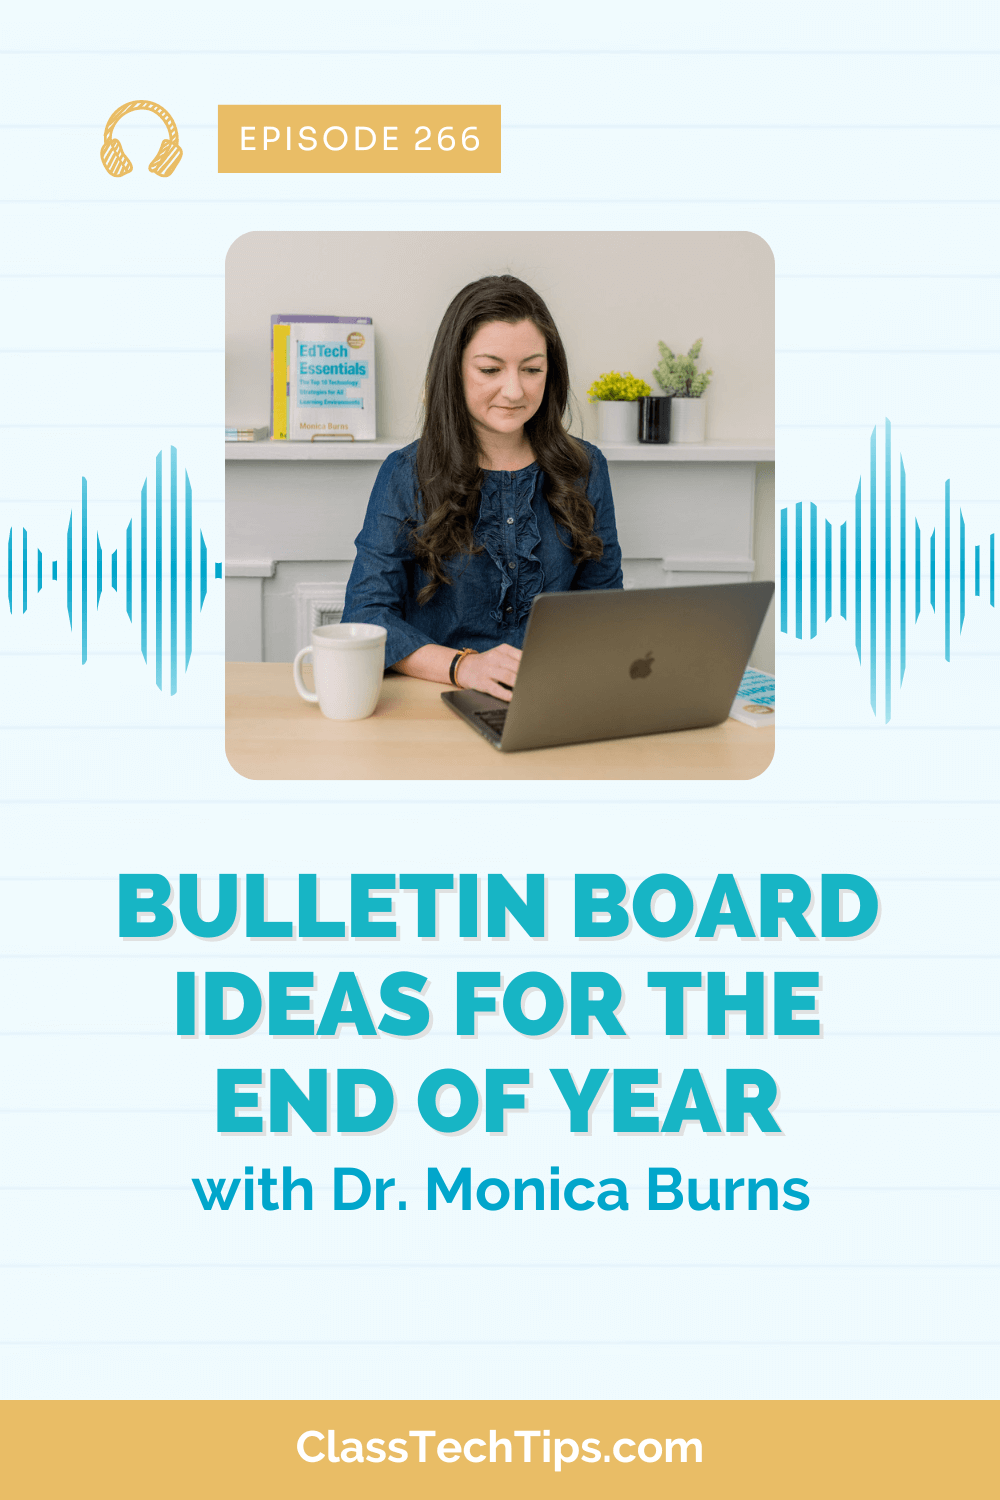 Dr. Monica Burns, featured in episode 266 of the Easy EdTech Podcast, is seated at a desk using a MacBook, surrounded by office decor including a book and potted plants. The podcast episode title "Bulletin Board Ideas for the End of Year" is displayed in stylish text on the right.